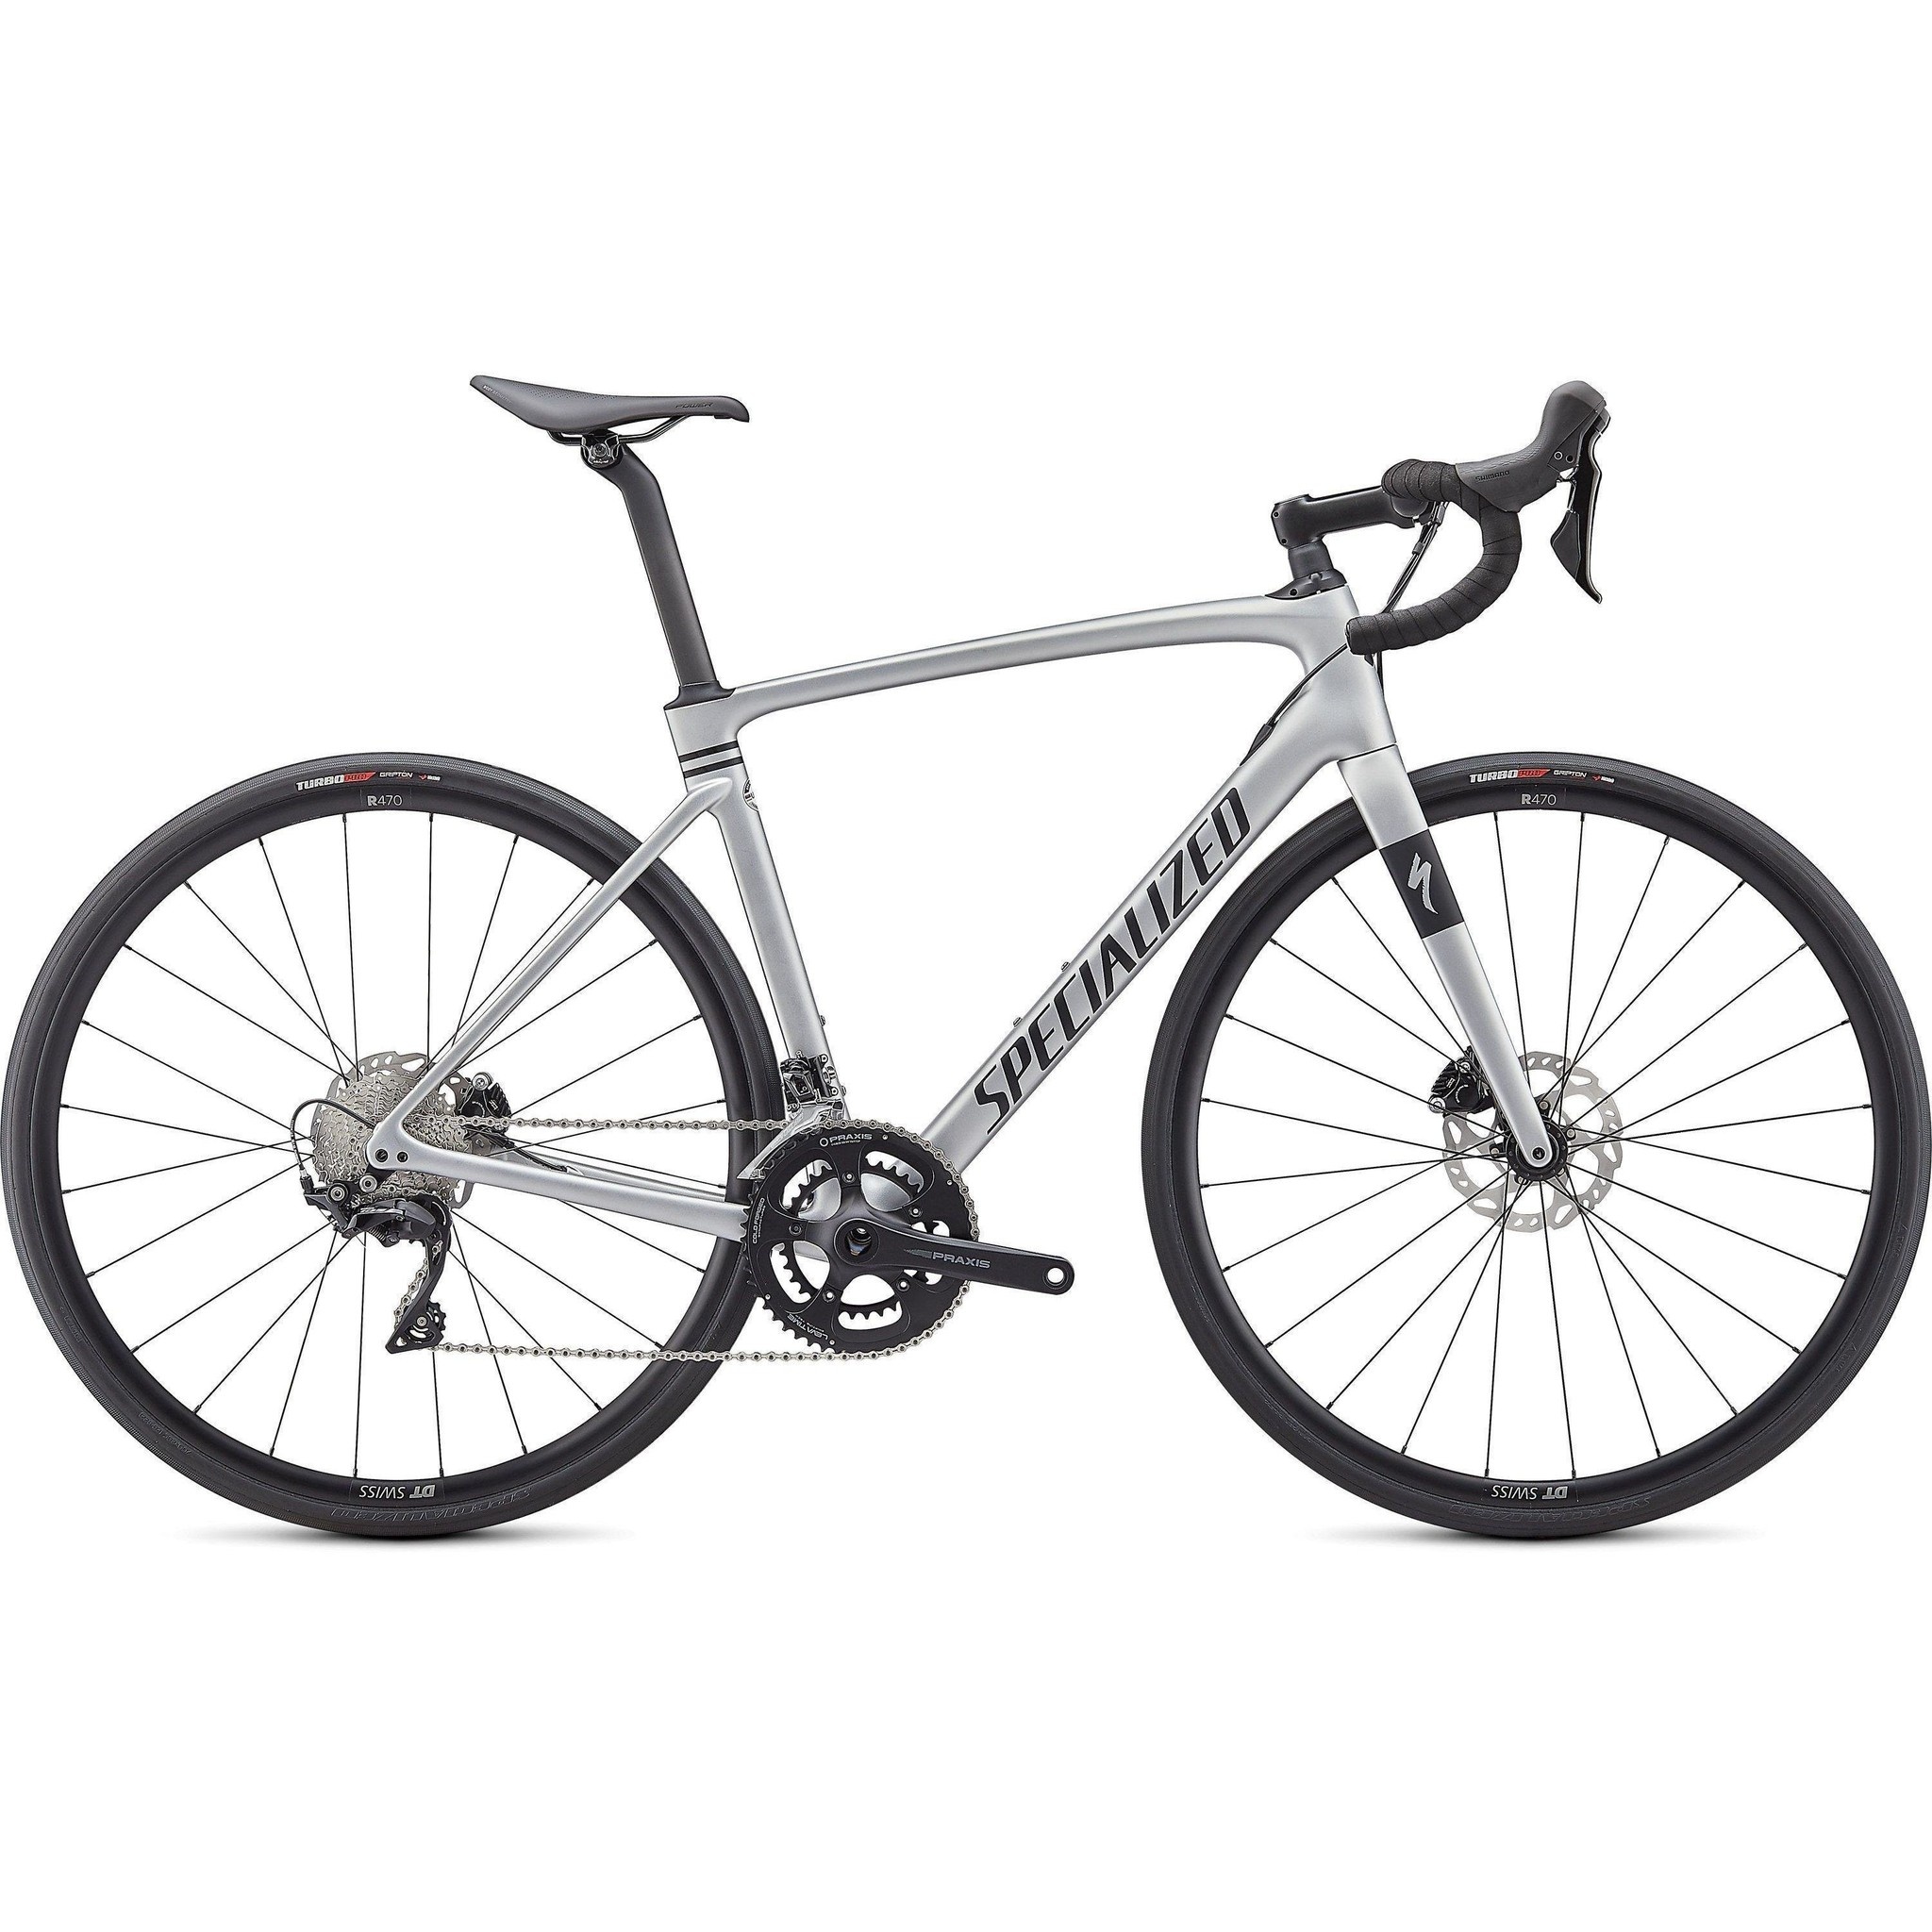 Specialized Bikes, Roubaix sport, Premium cycling, Collective of cycling enthusiasts, 2050x2050 HD Handy